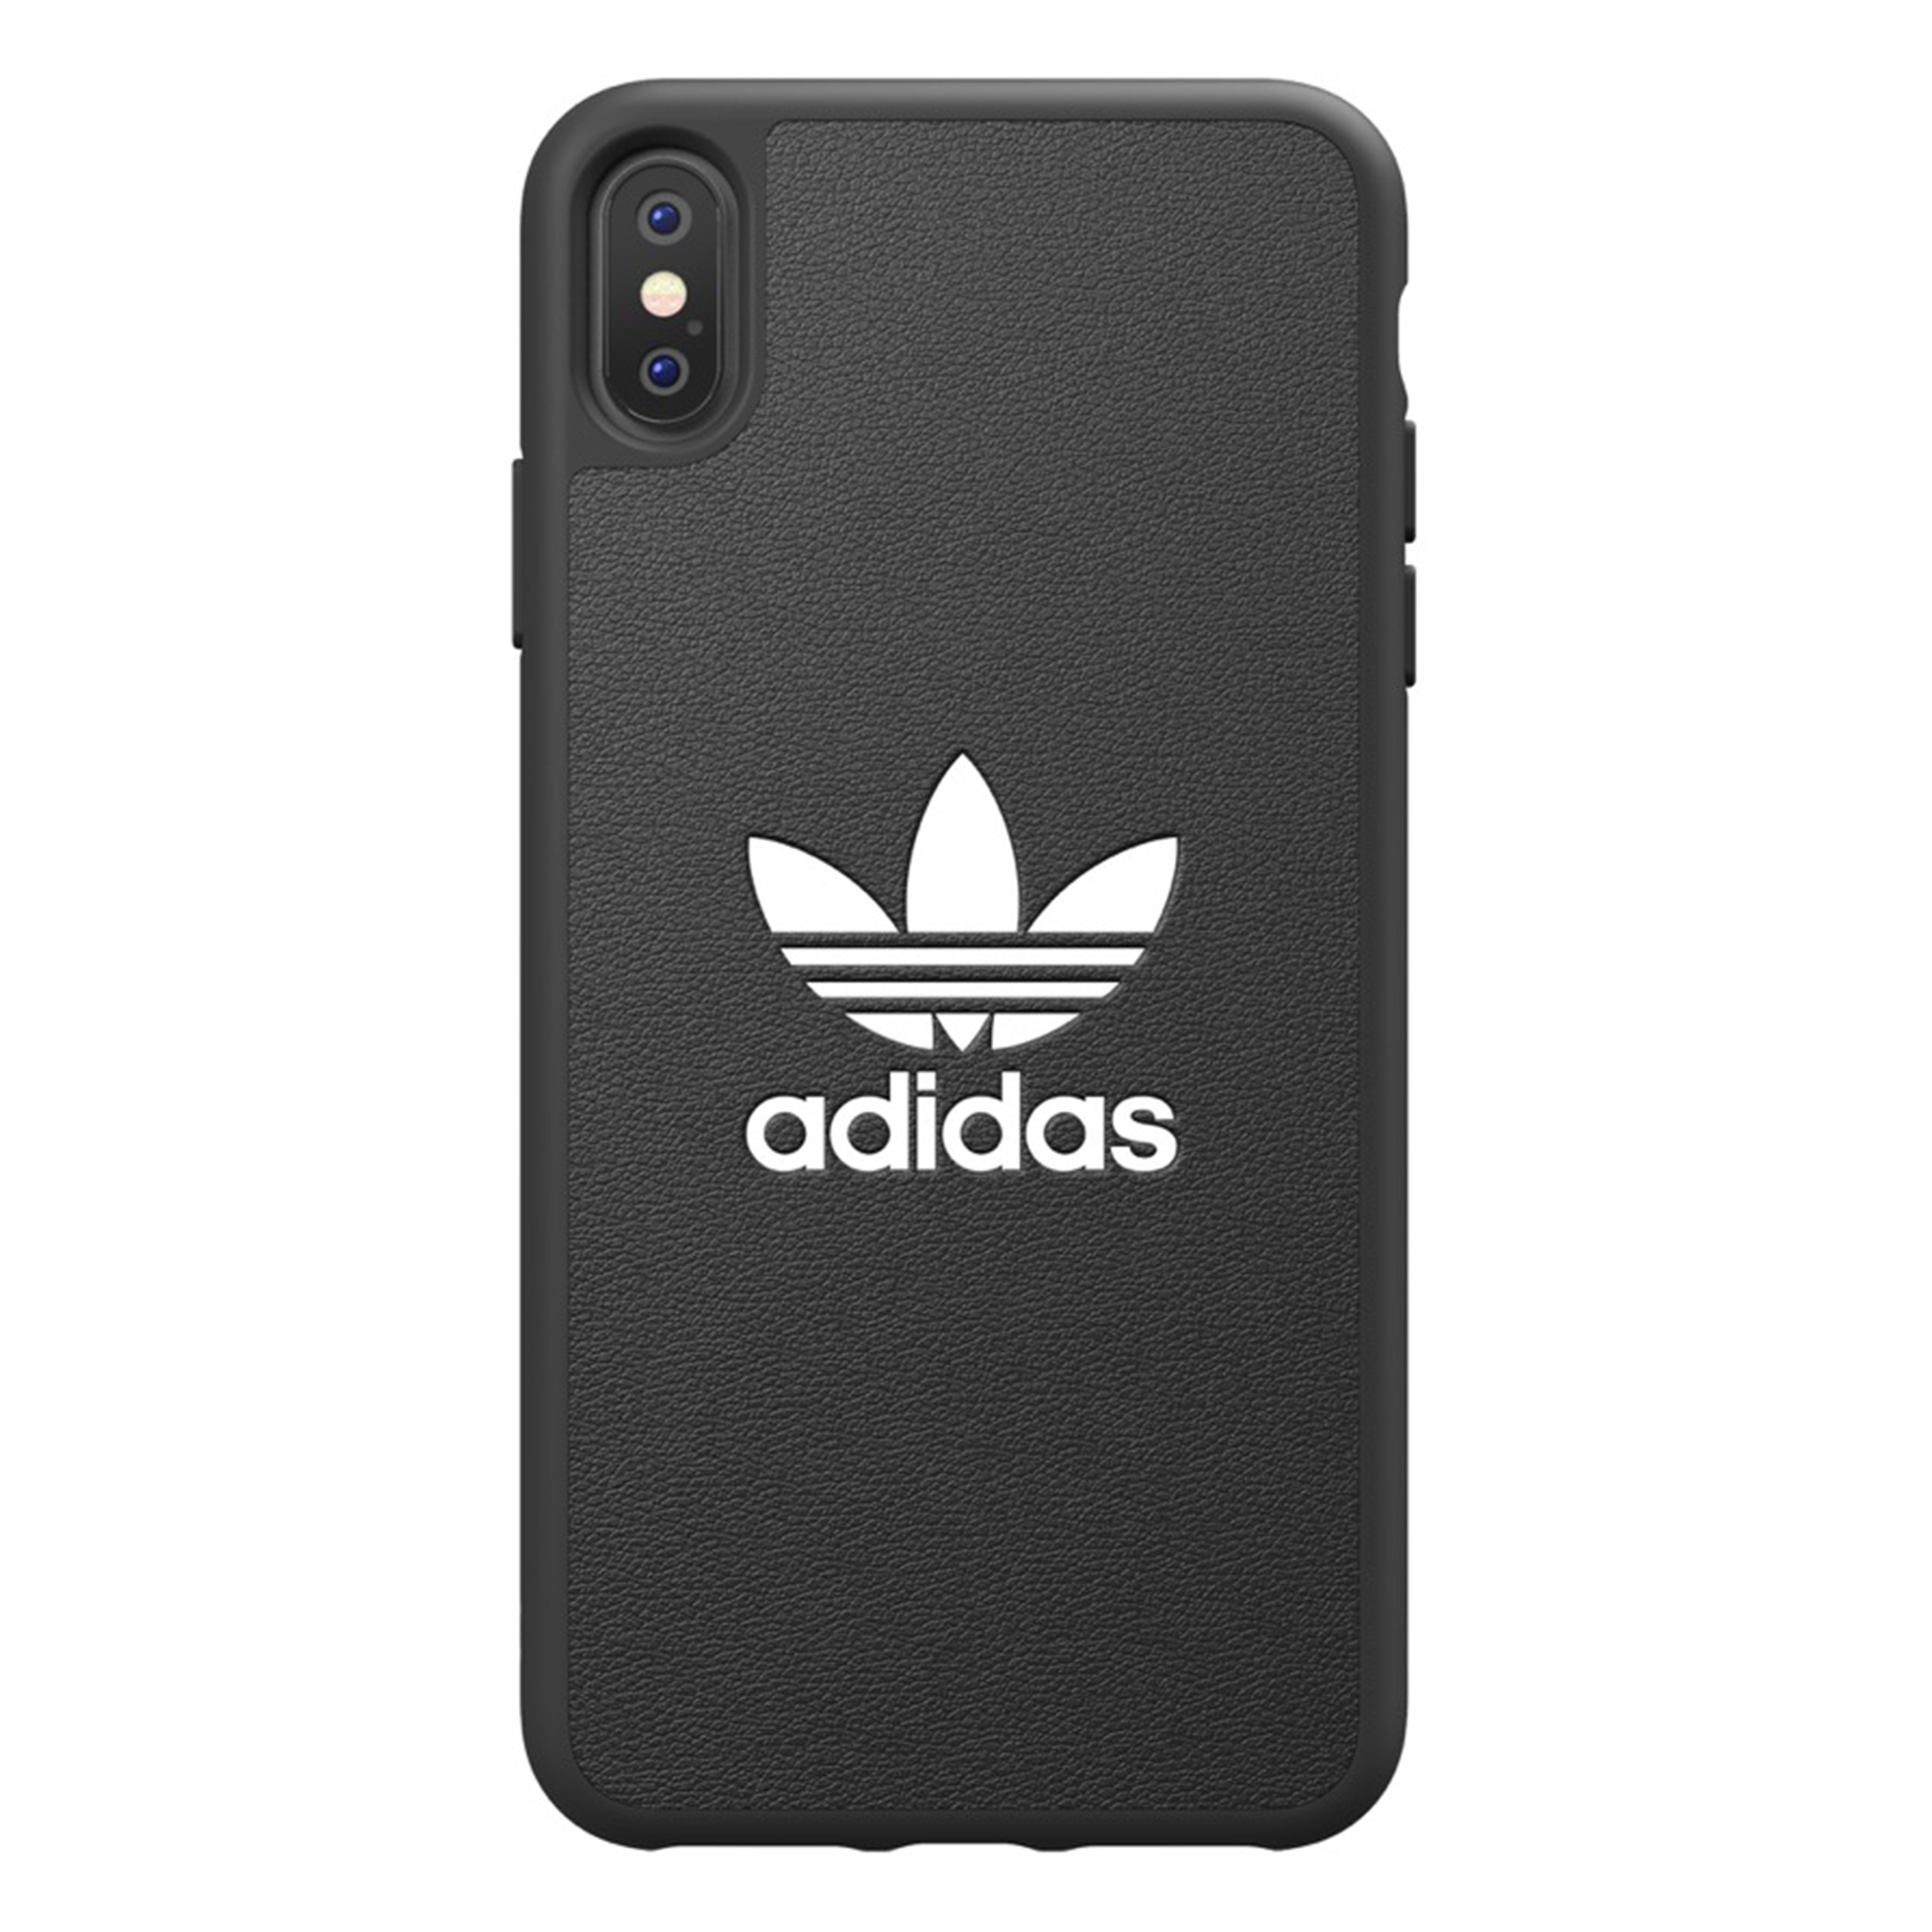 adidas store phone number